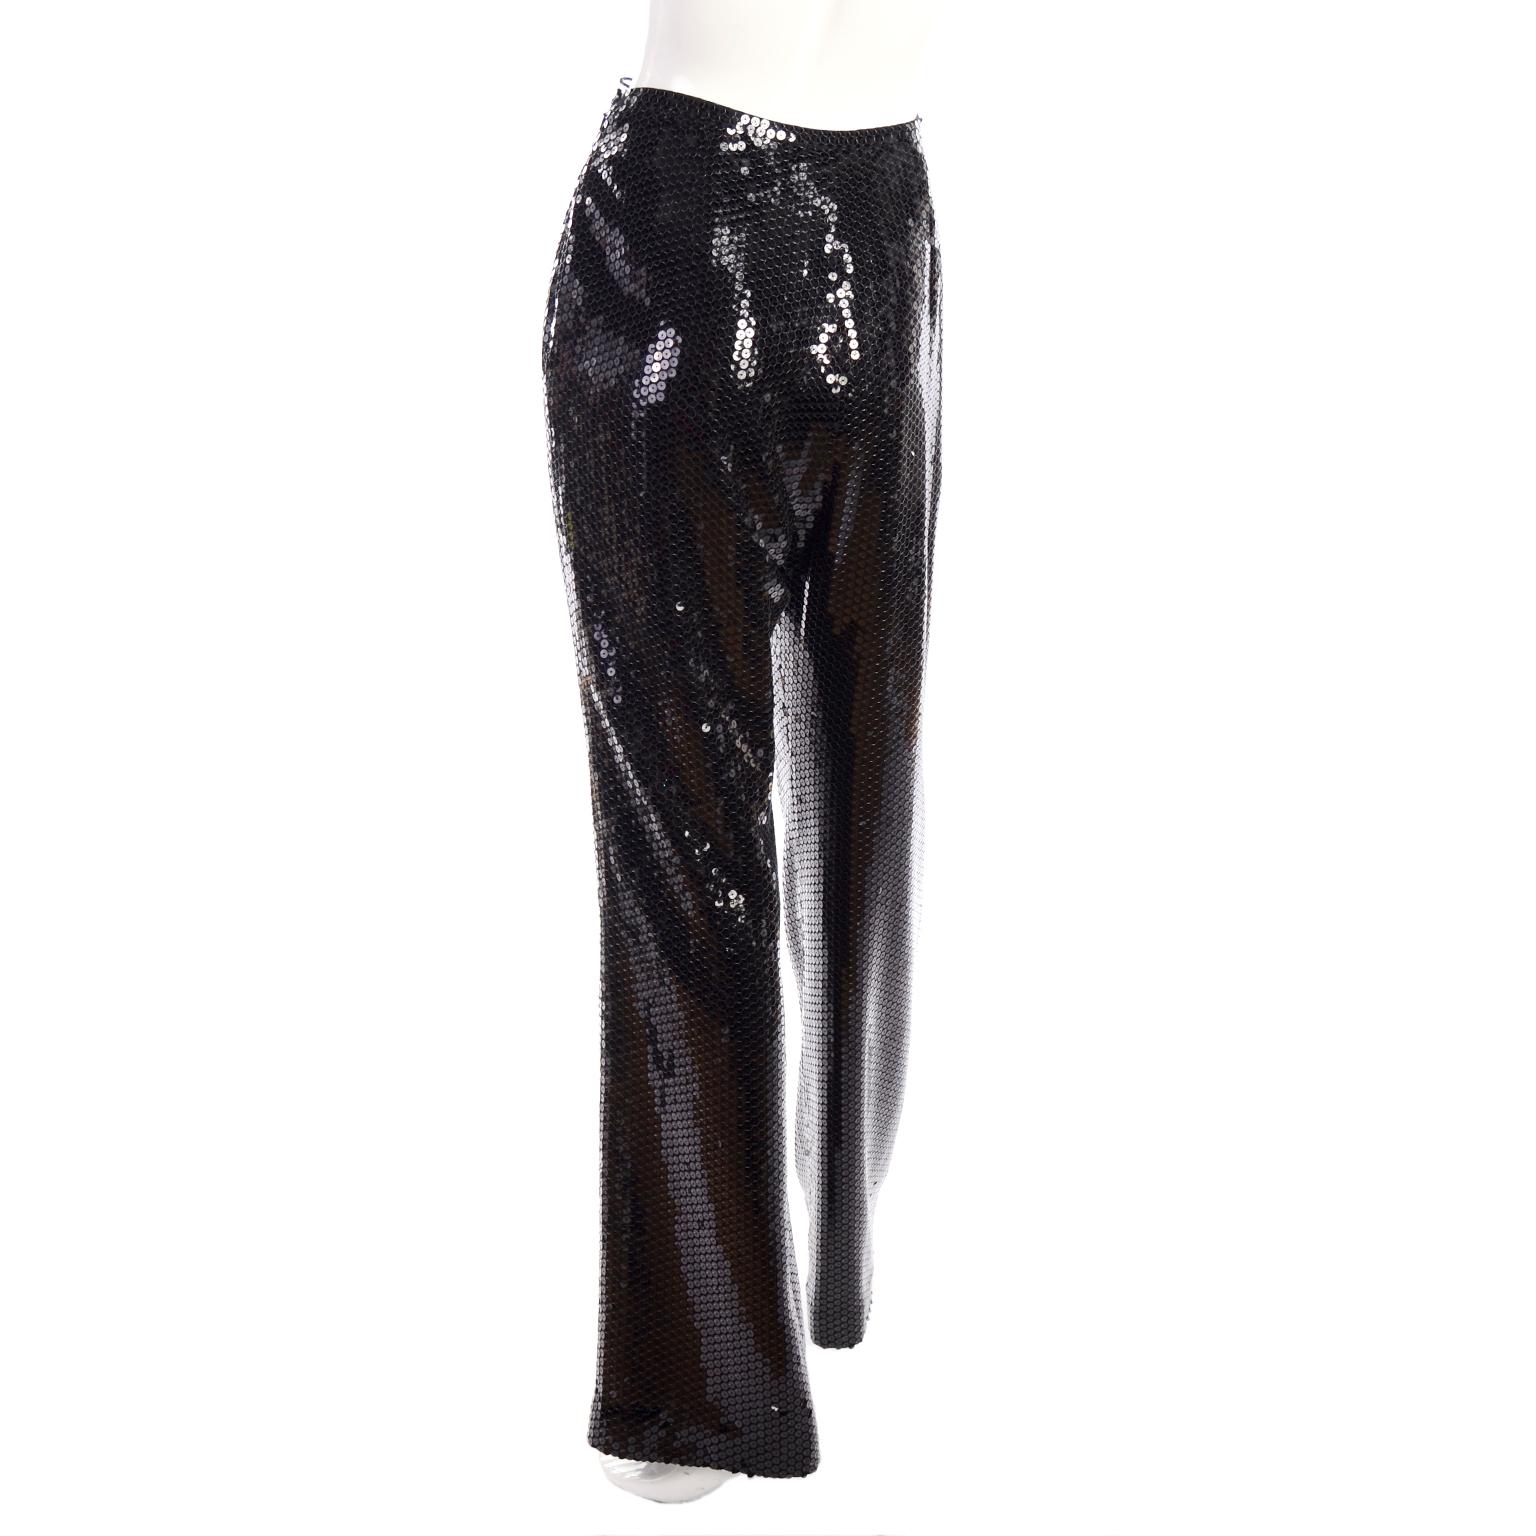 This pair of Oscar de la Renta evening trousers are perfect to wear to a special event with a dressy top as an evening dress alternative. The pants are a size 10 and appear to have only been worn once, if ever.  Beautiful rows of shimmering black